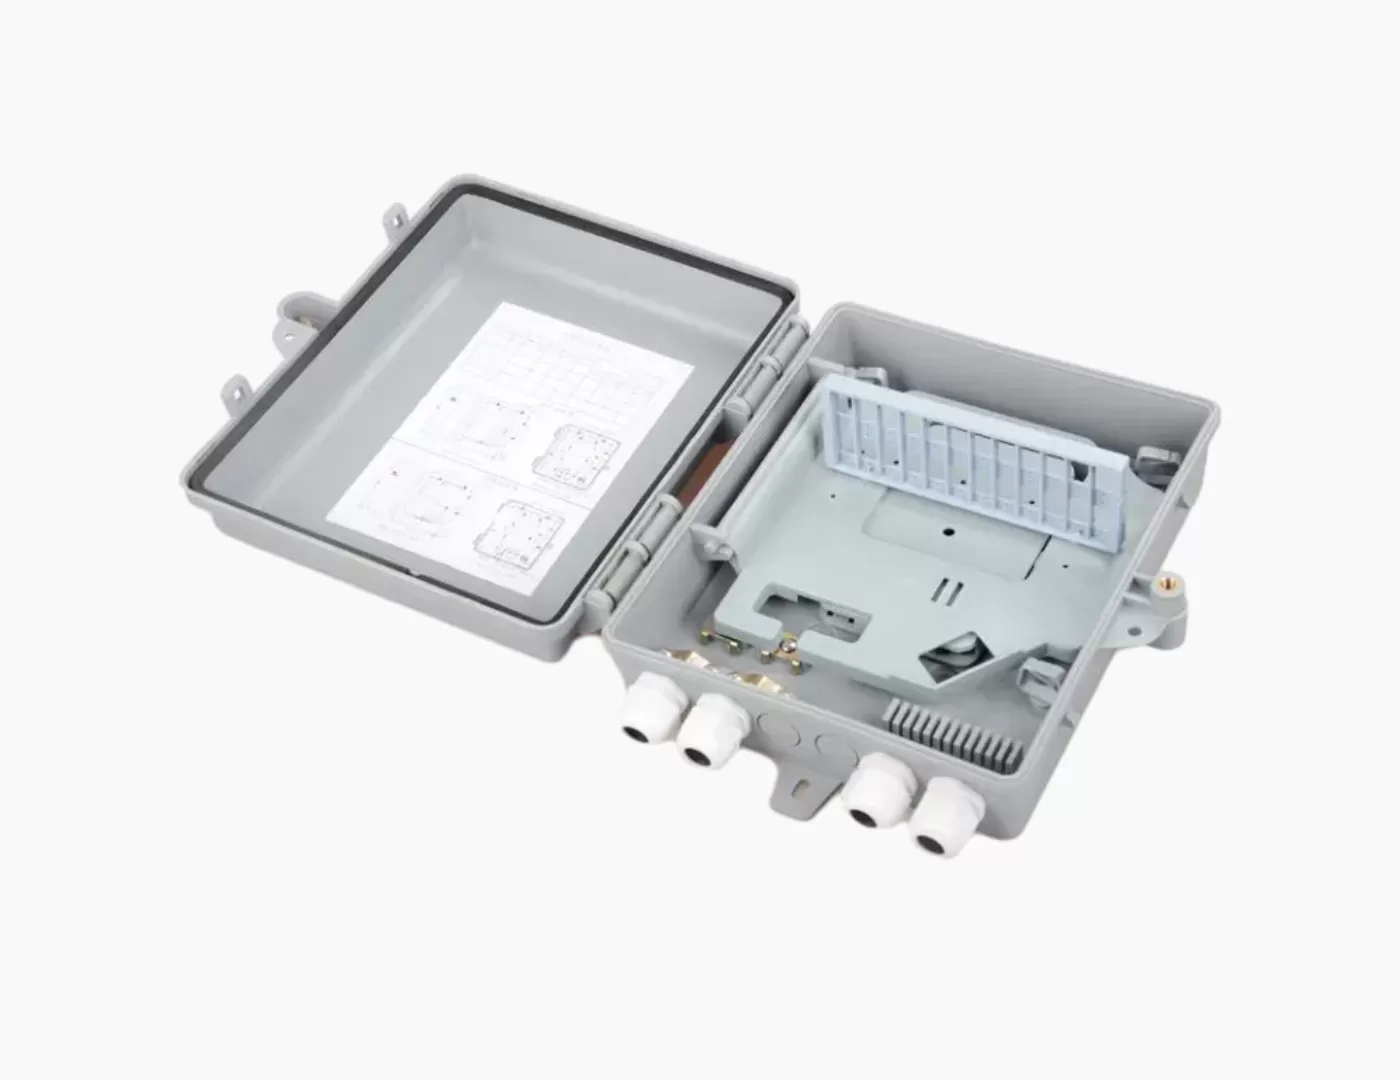 How to Customize/OEM Fiber Distribution Boxes with China Suppliers?